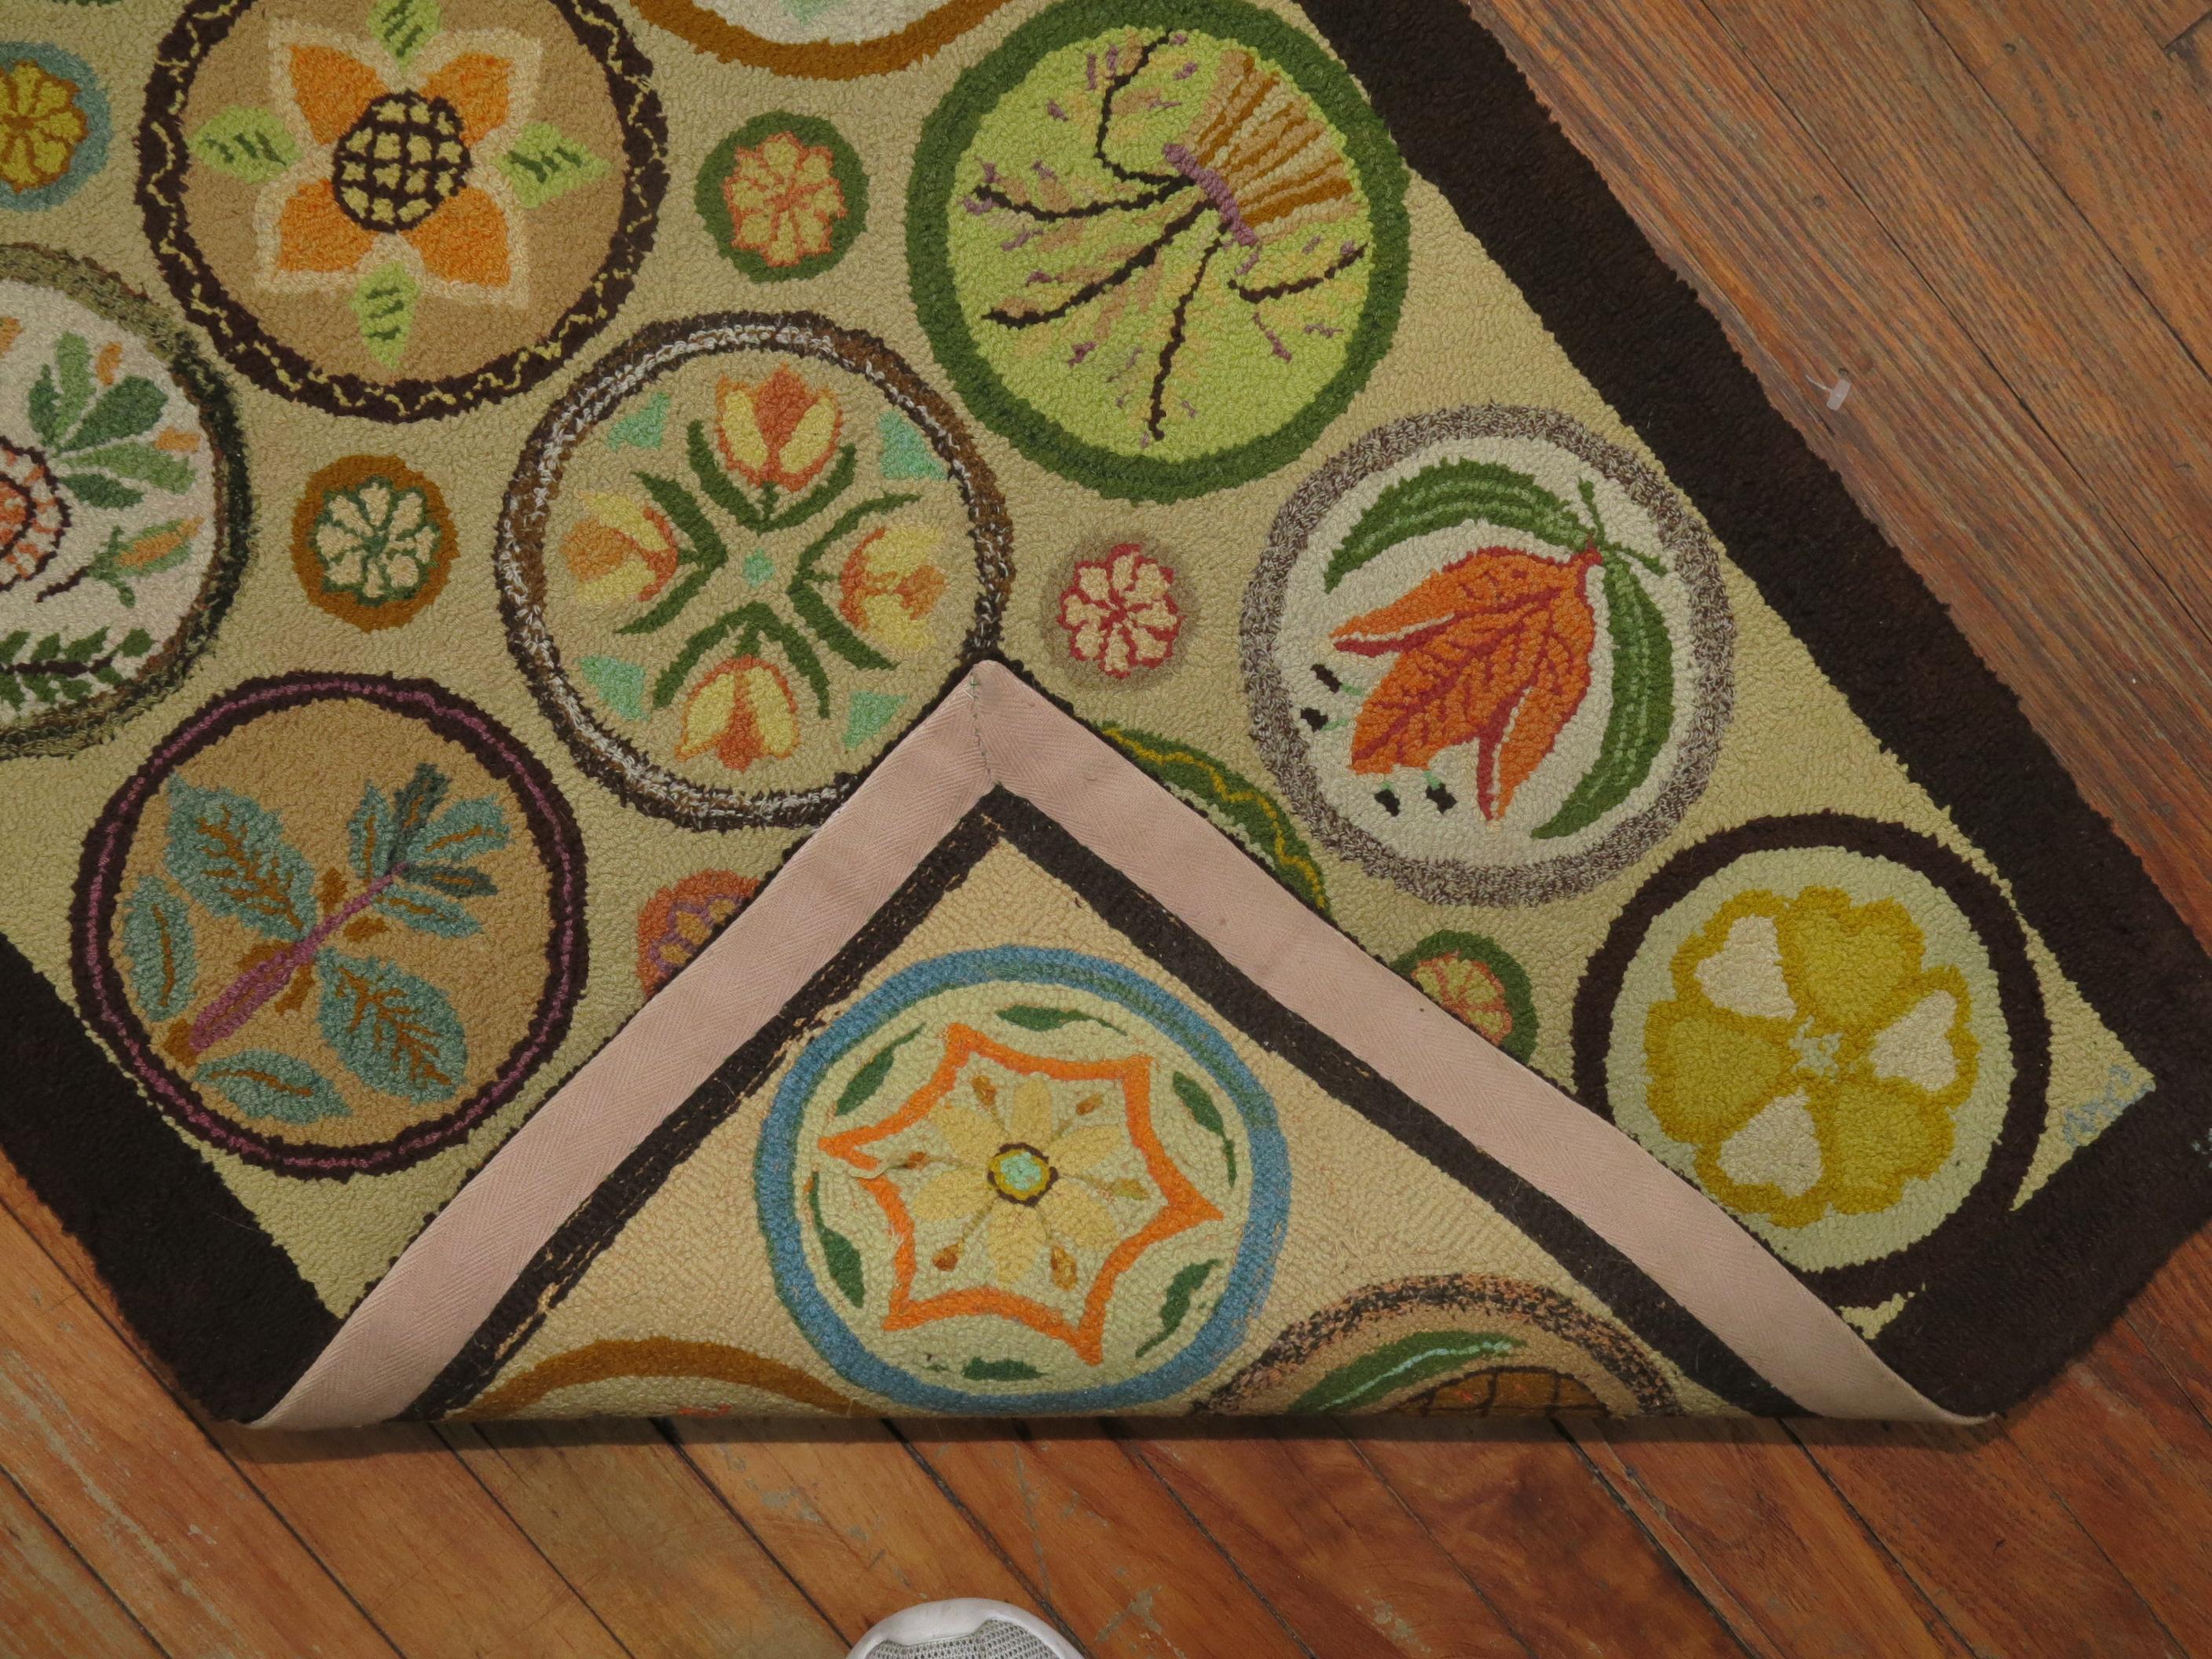 An American hooked rug dated 1980 with a colorful multiple circular design featuring different fruits, animals and plants.

Measures: 2' x 3'2''.